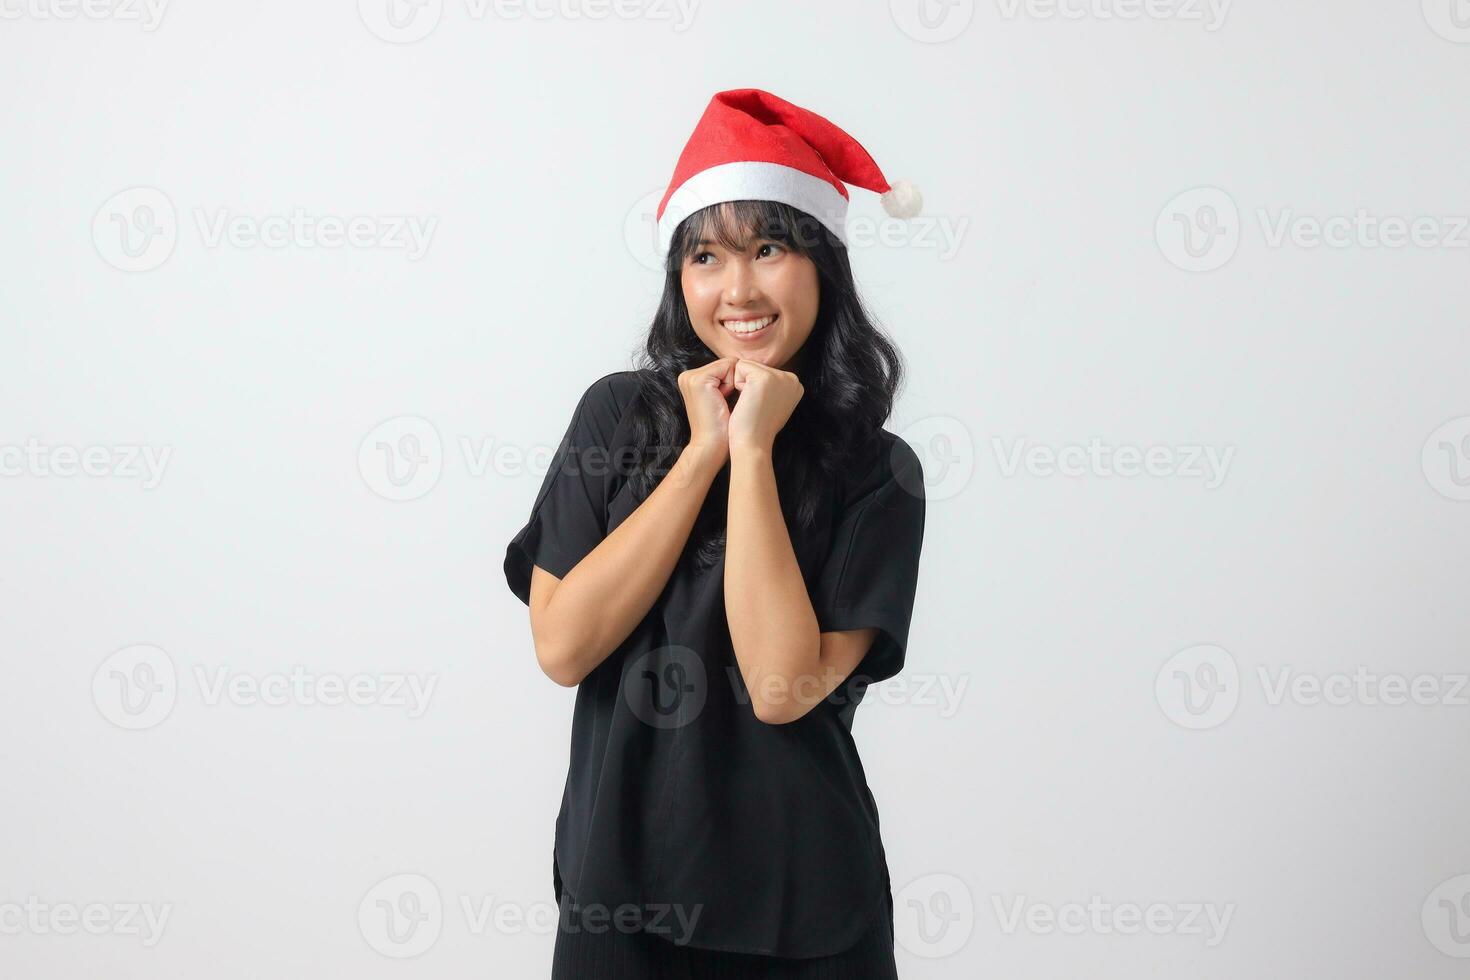 Portrait of attractive Asian woman with red Santa hat feeling happy, showing excited and cheerful expression. New year and christmas concept. Isolated image on white background photo